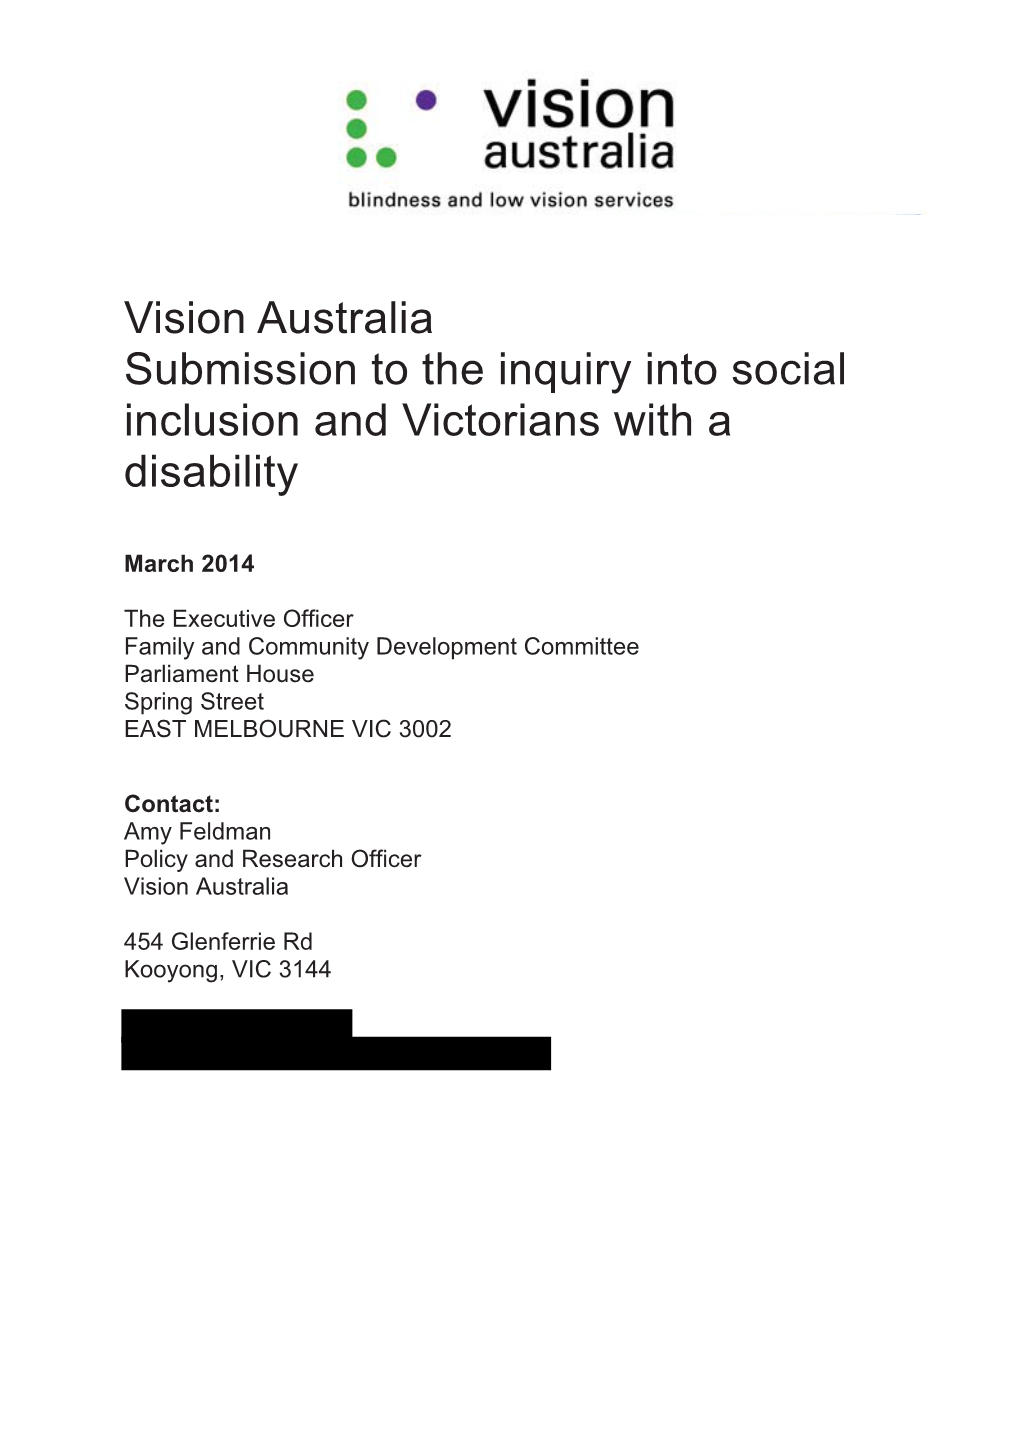 Vision Australia Submission to the Inquiry Into Social Inclusion and Victorians with a Disability